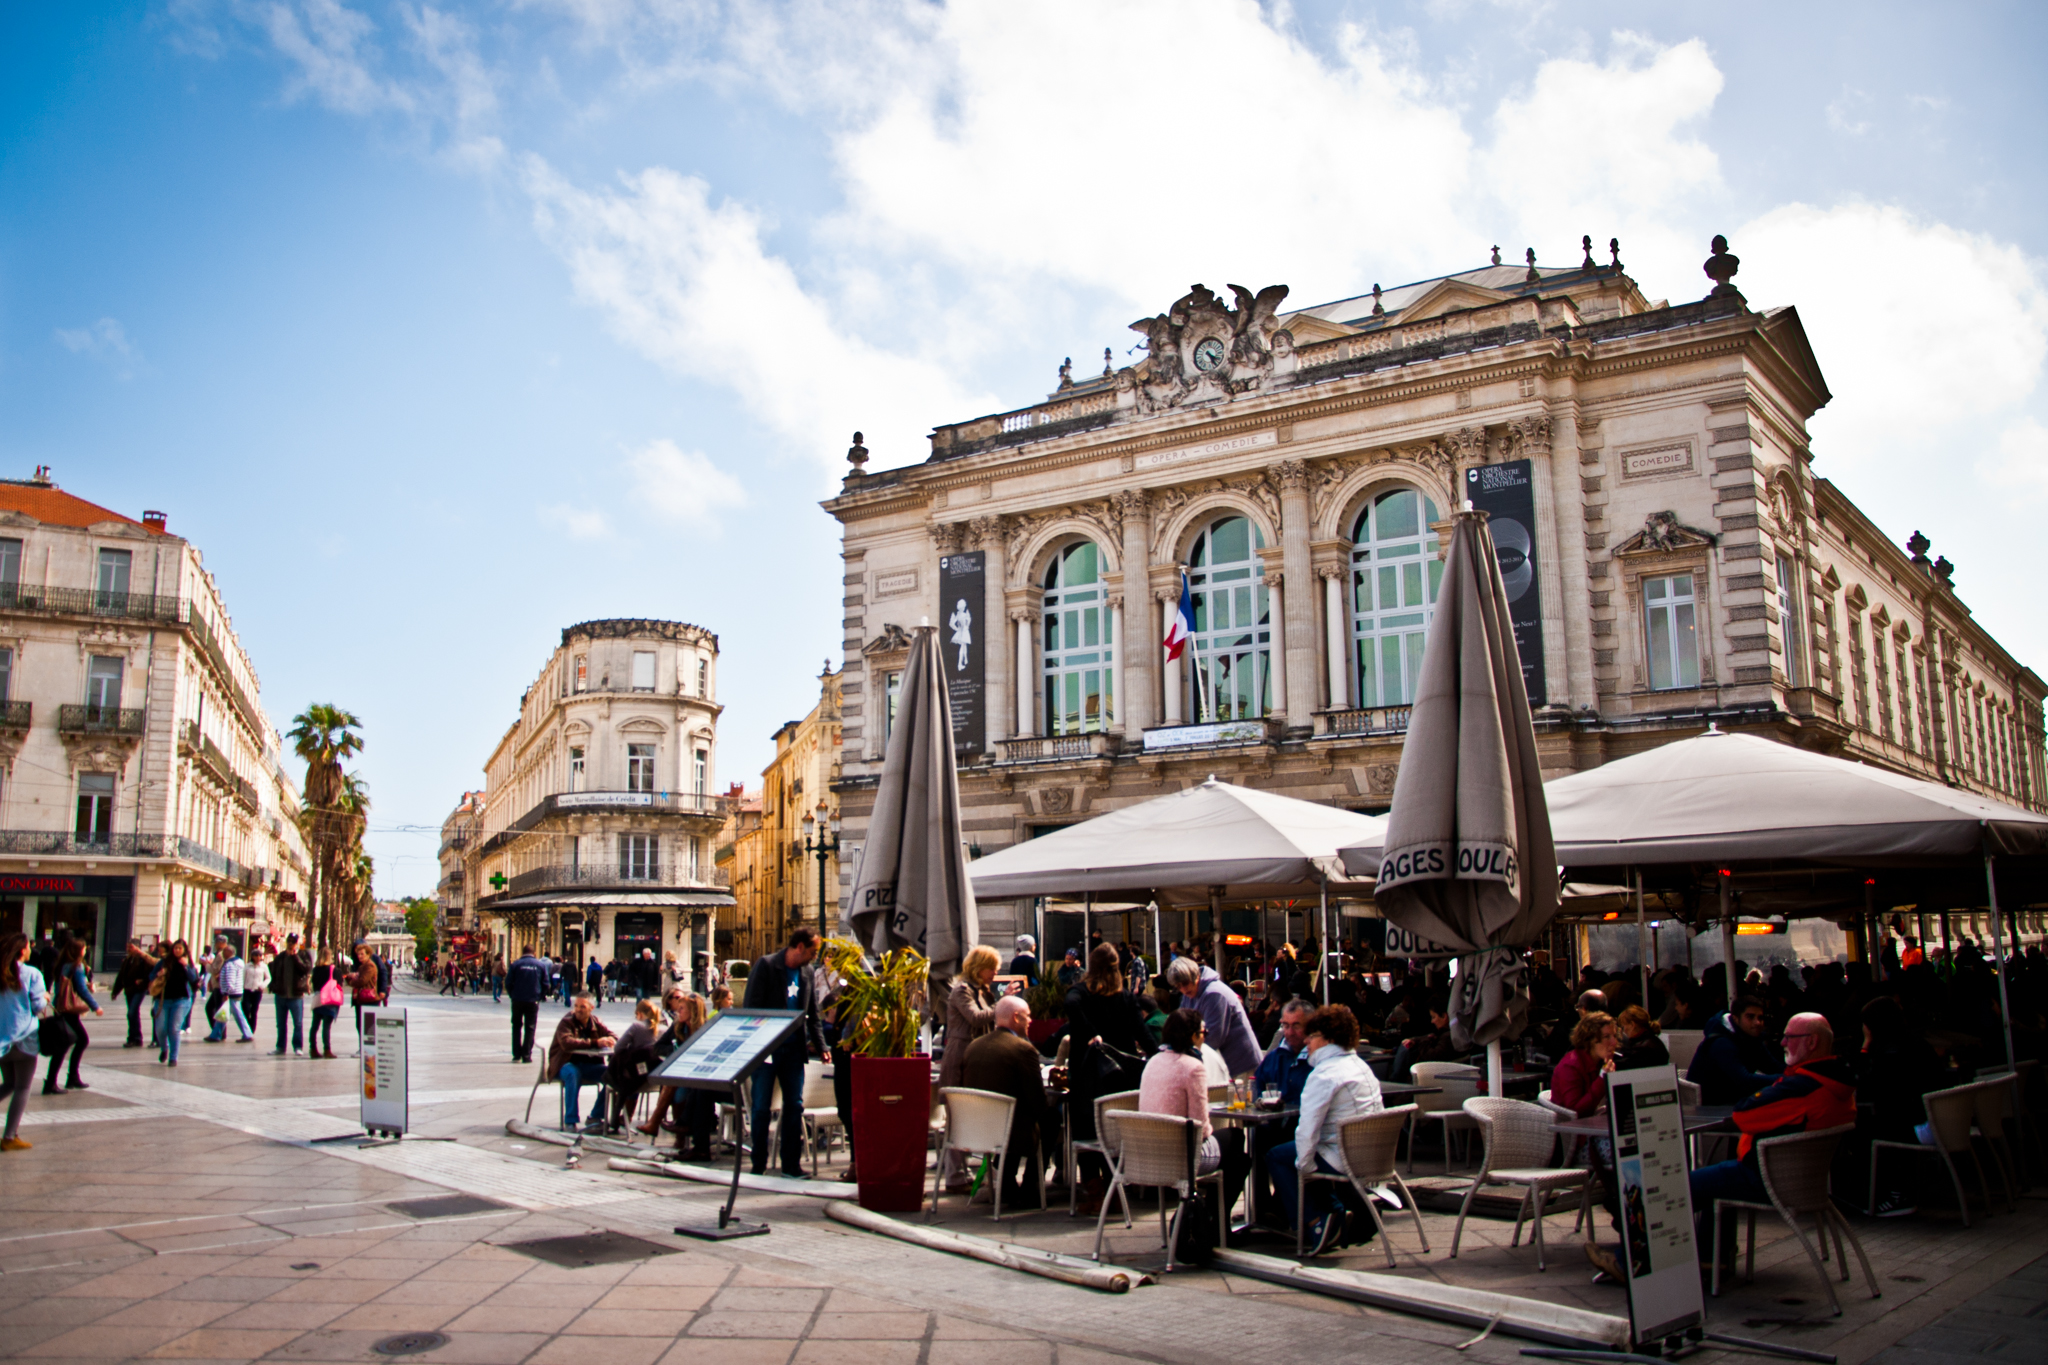 Expanding horizons in Montpellier